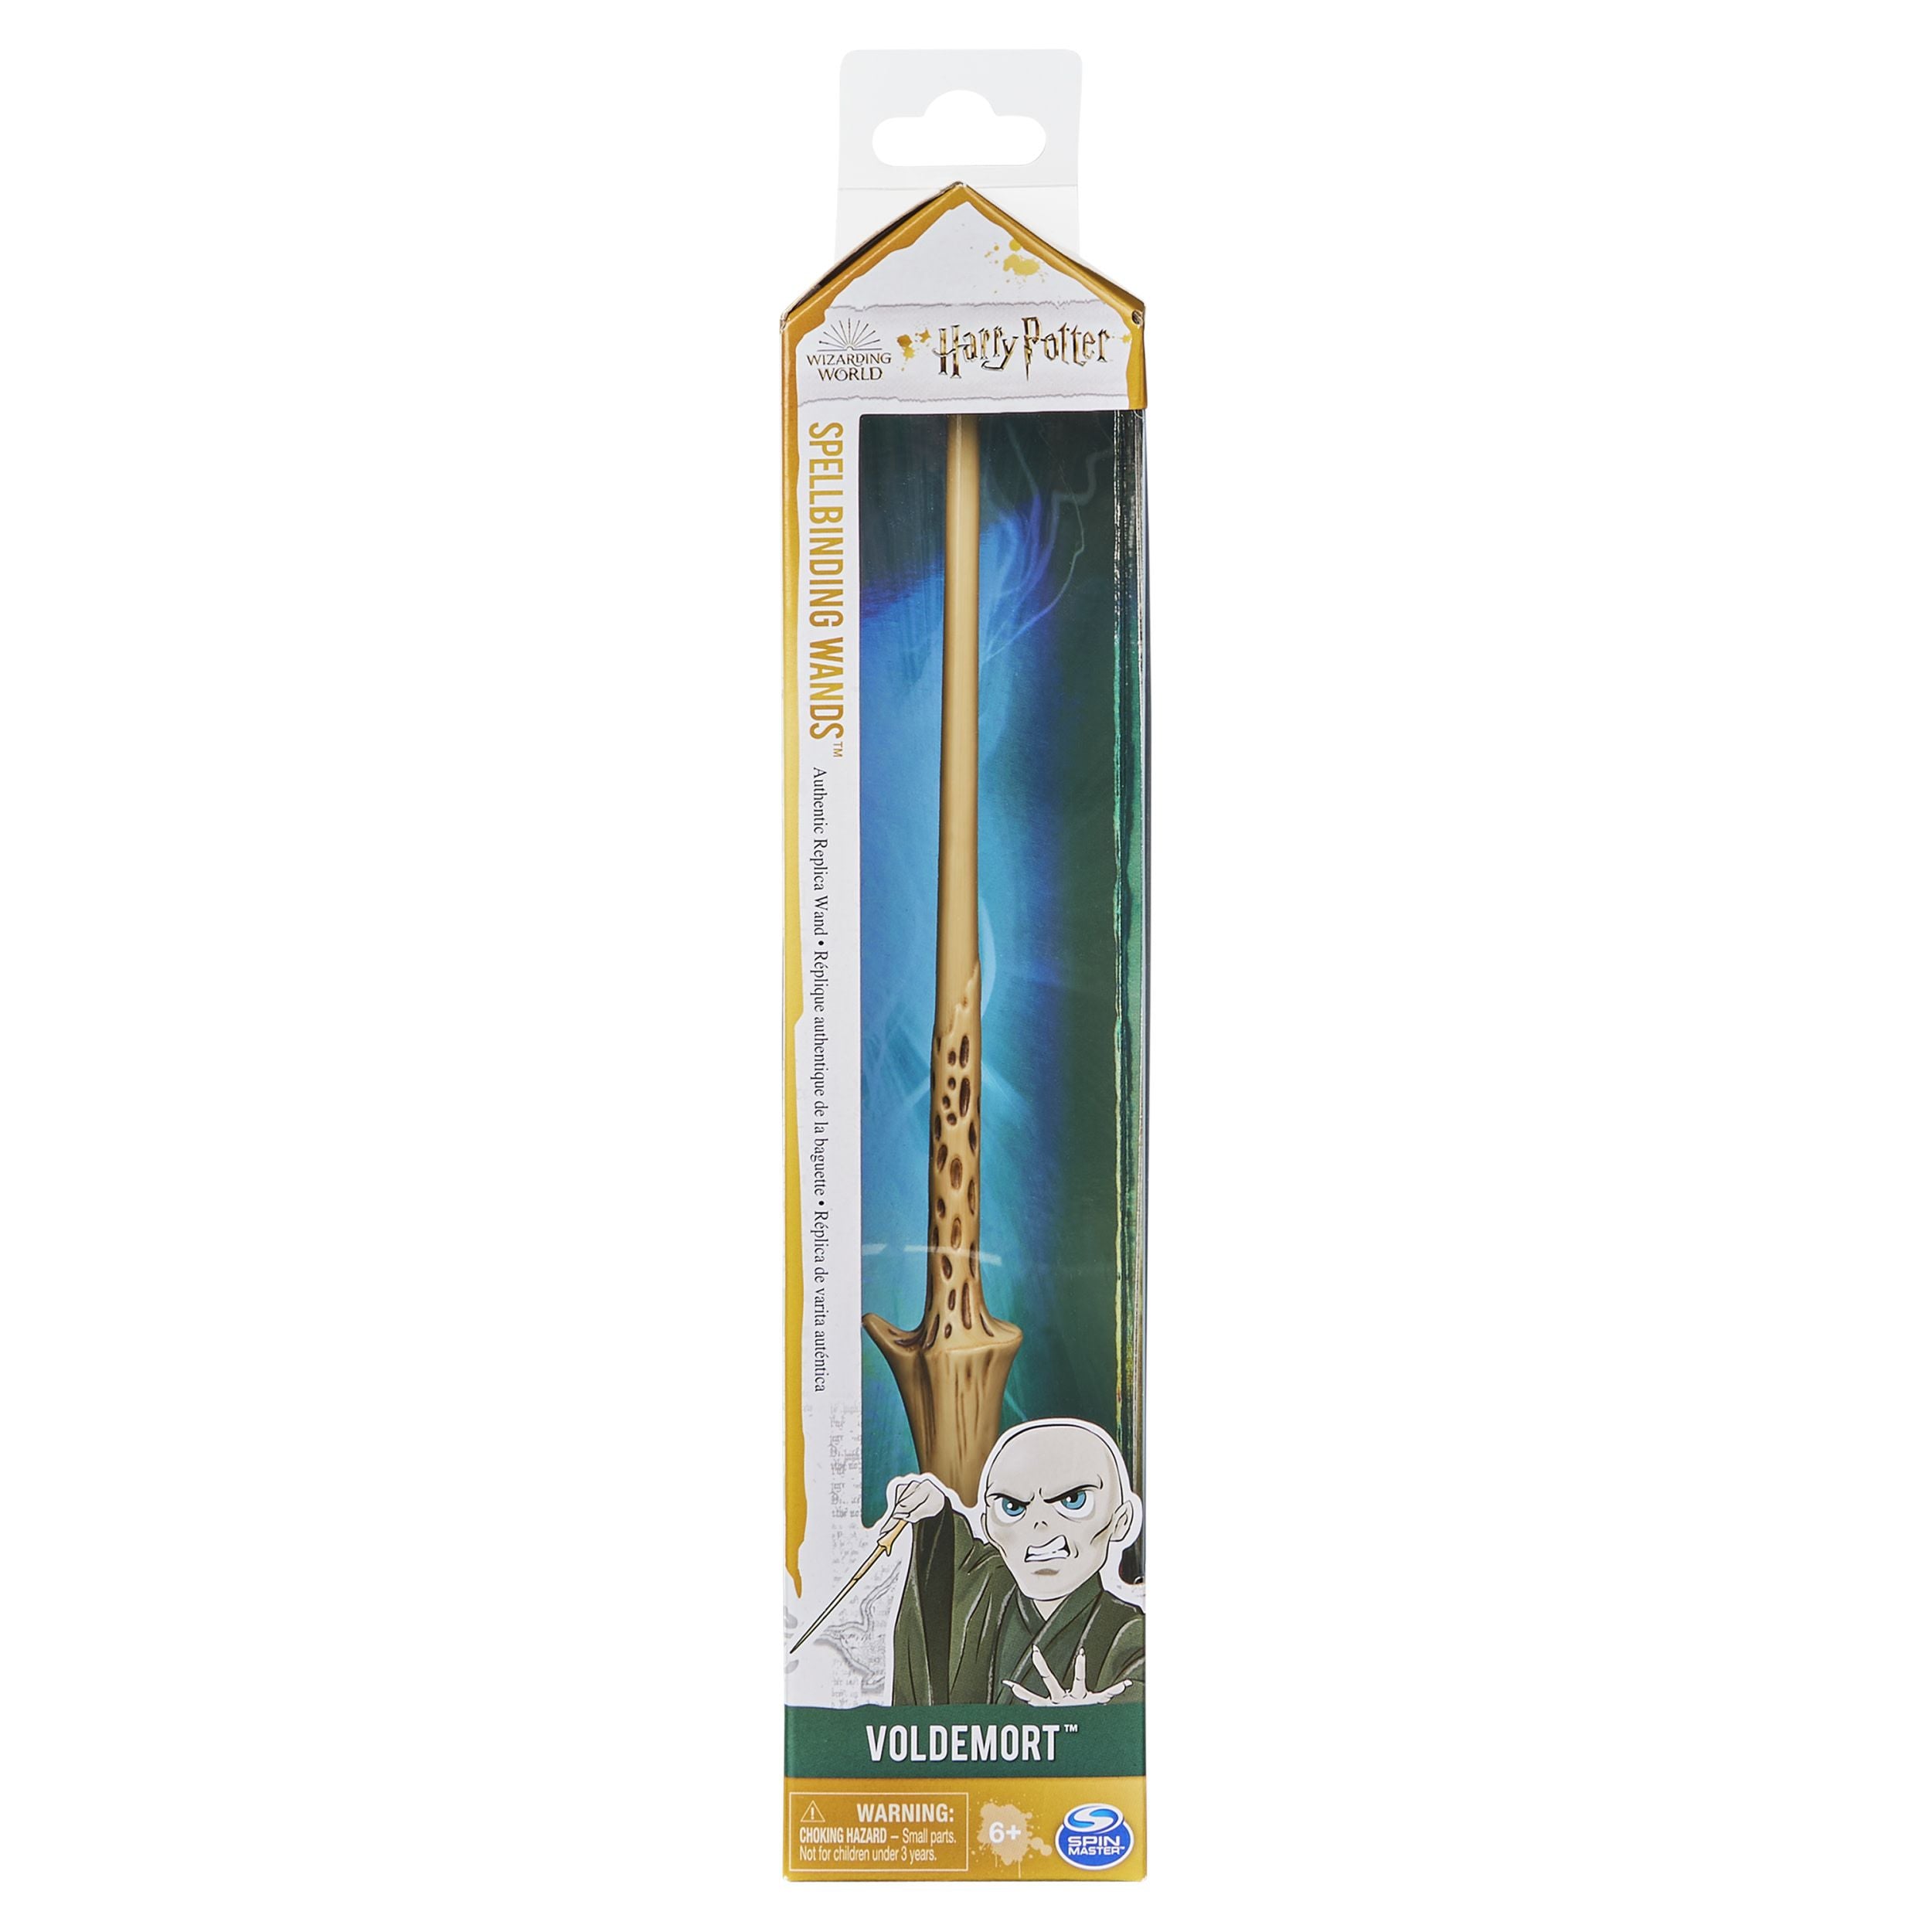 The Wizarding World Harry Potter Voldemort Spellbinding Wand - Albagame